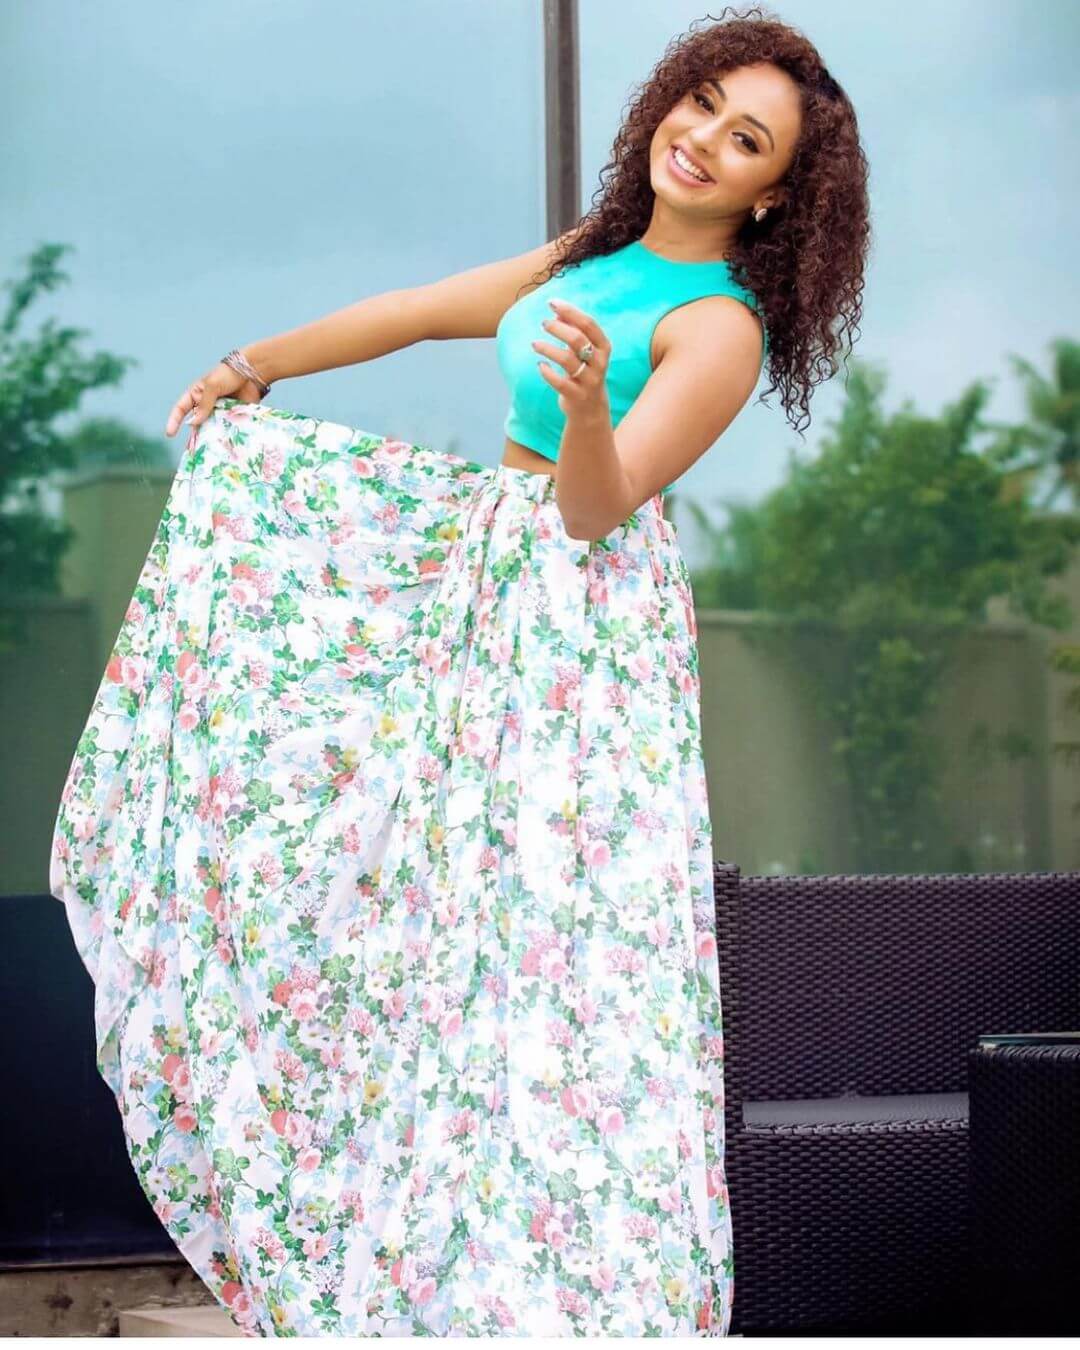 Beautiful Pearle Maaney  In Floral Printed Skirt With Ice Blue Crop Top